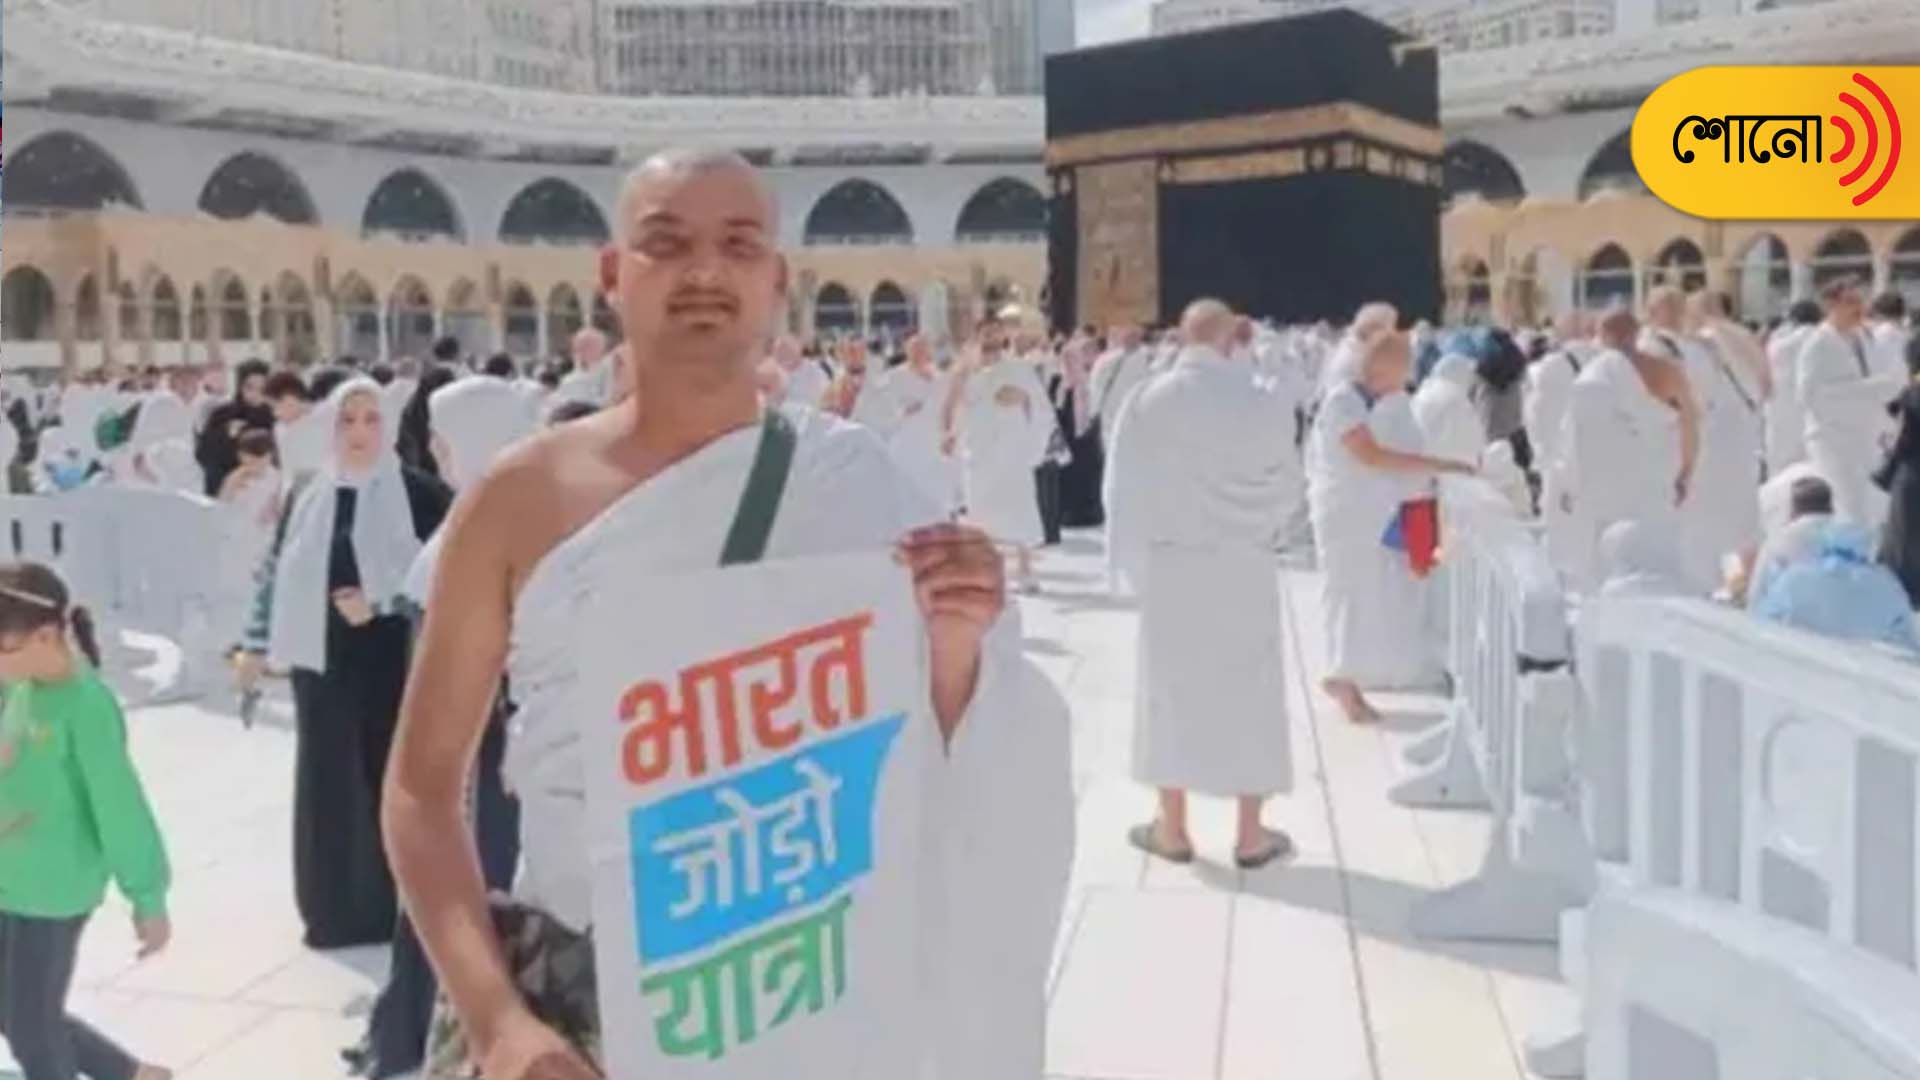 Congress Leader Punished For Getting Clicked With 'Bharat Jodo Yatra' Poster In Mecca